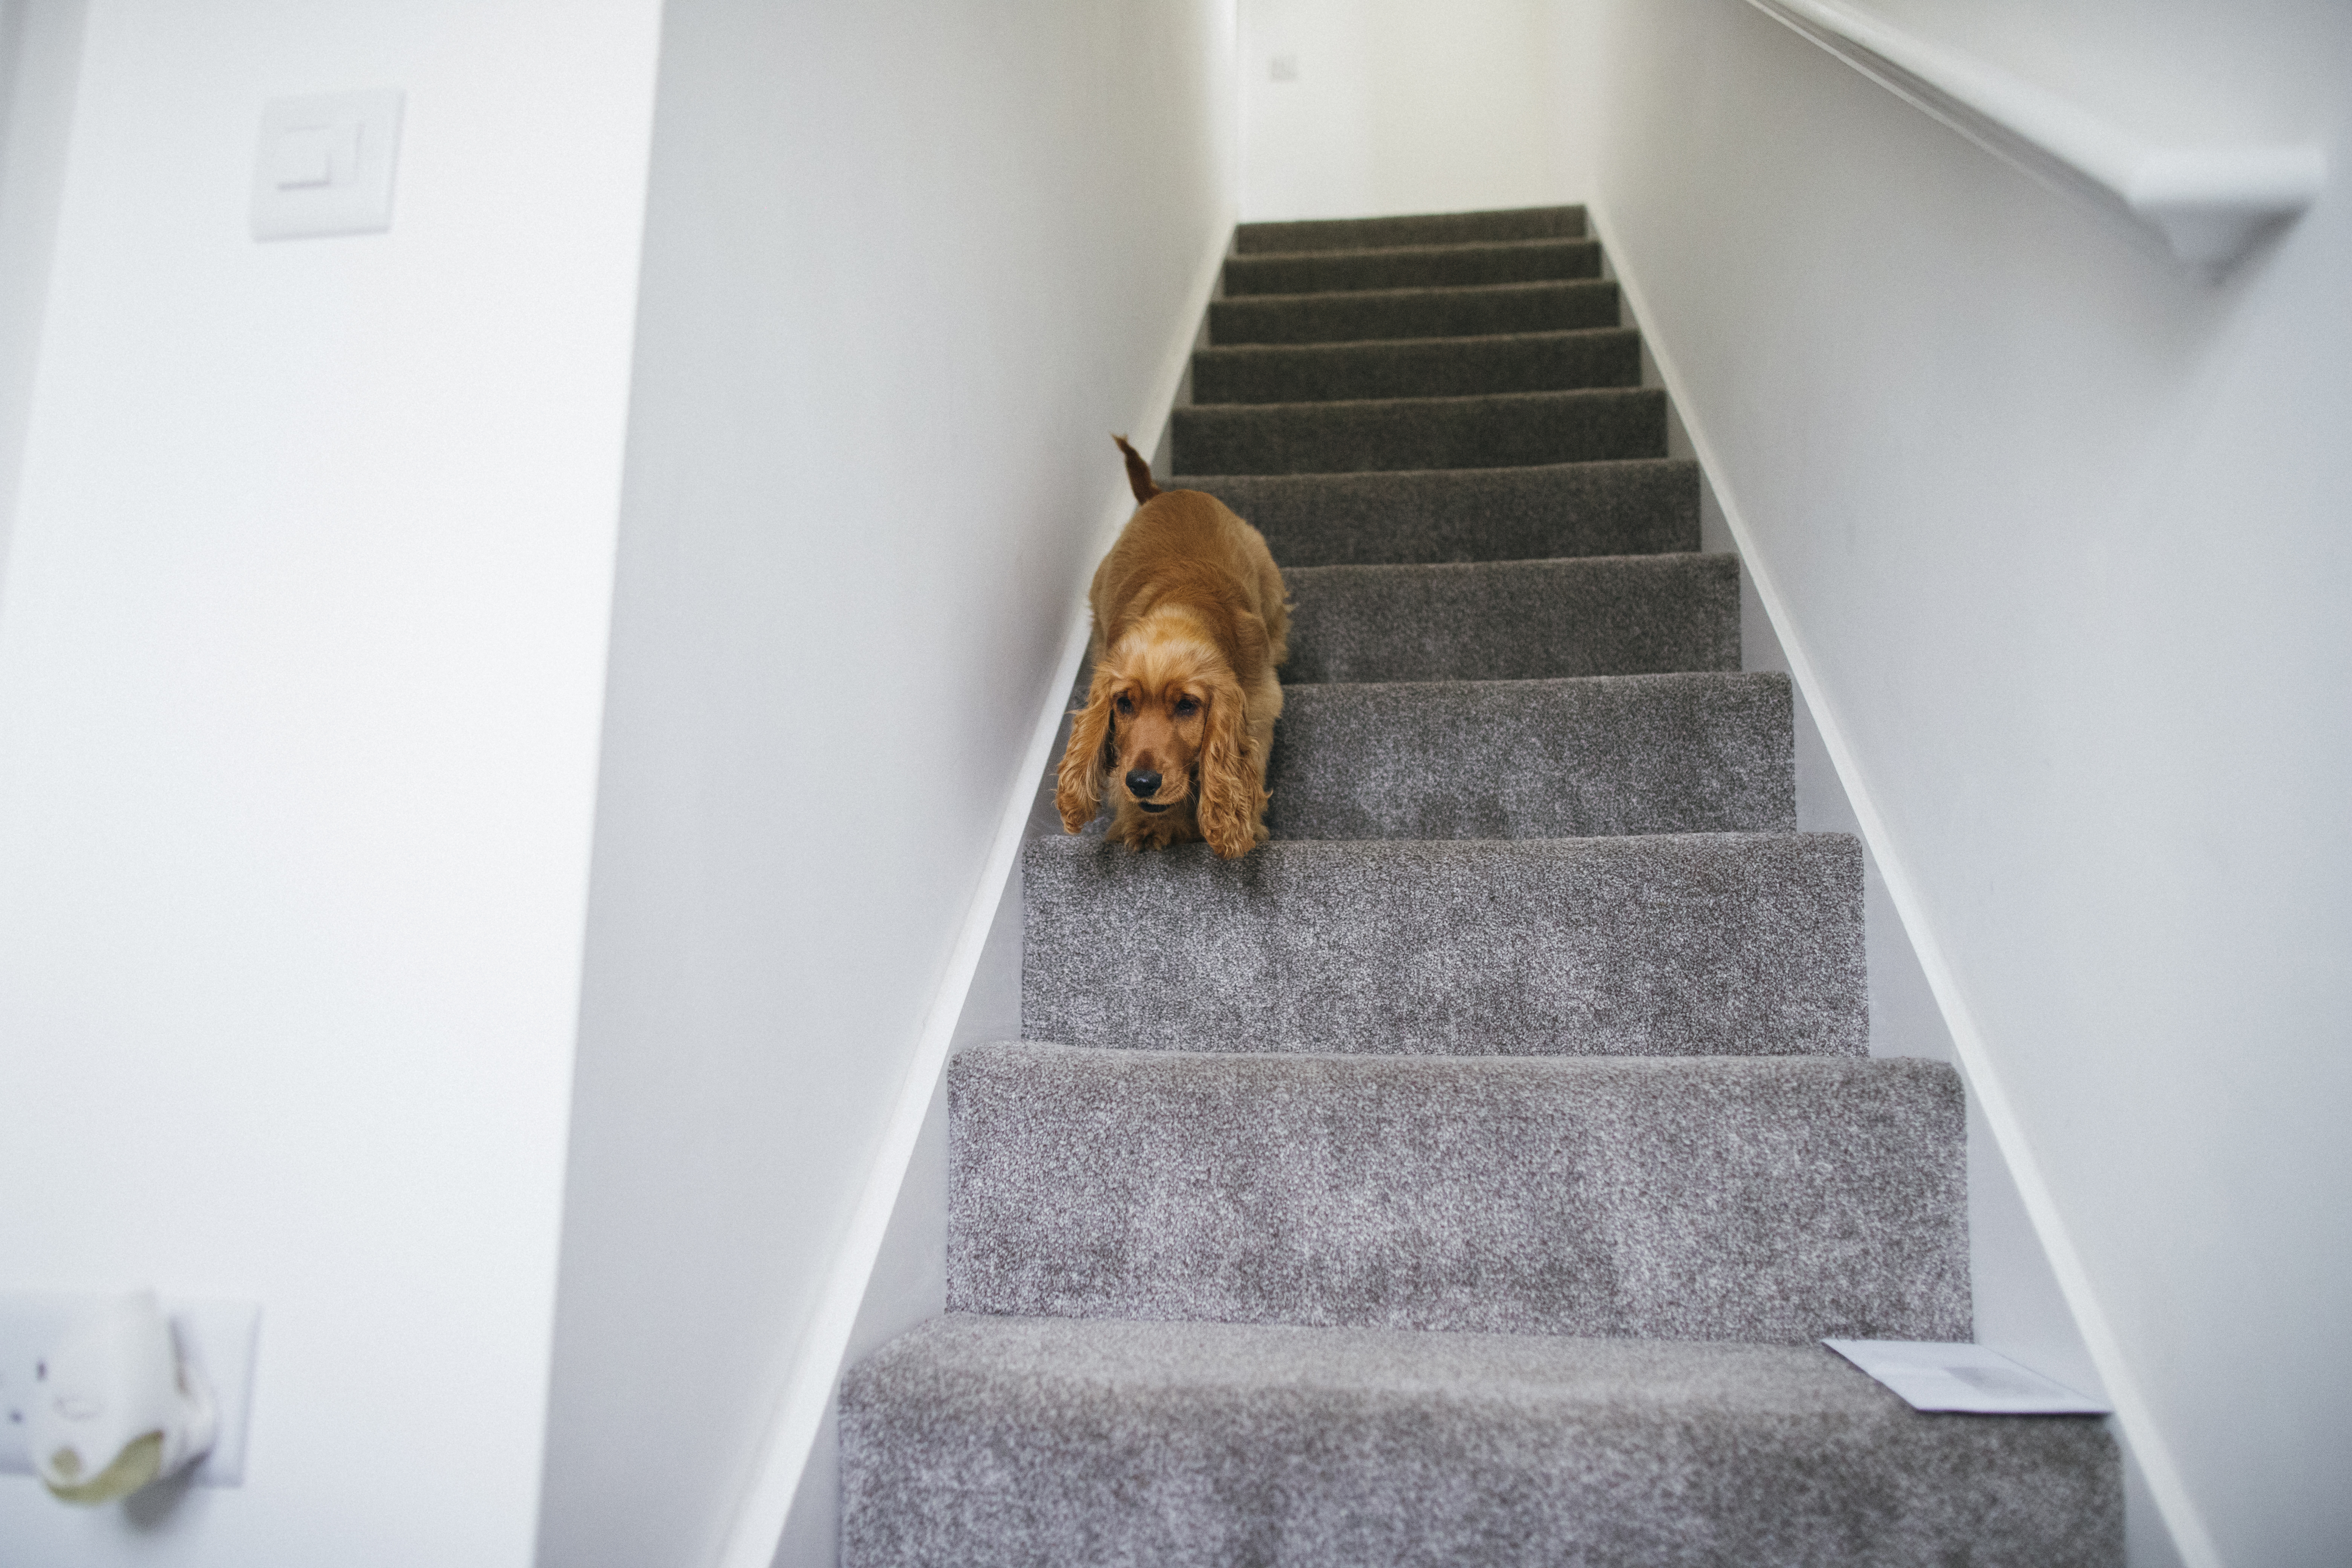 Dog running down the stairs in a house | Source: Getty Images